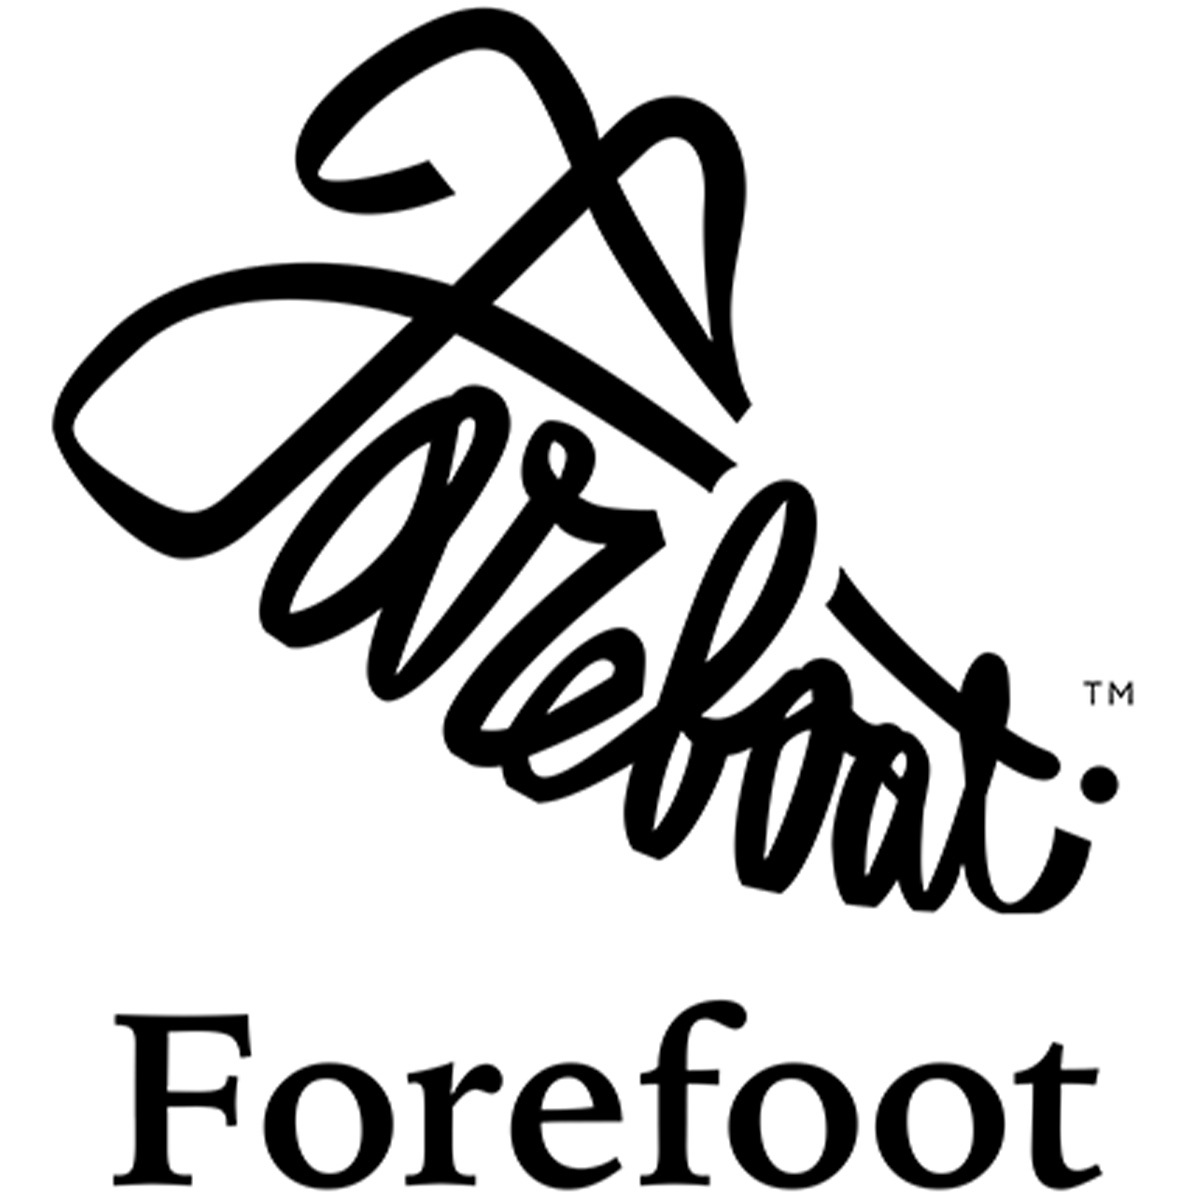 FOREFOOT